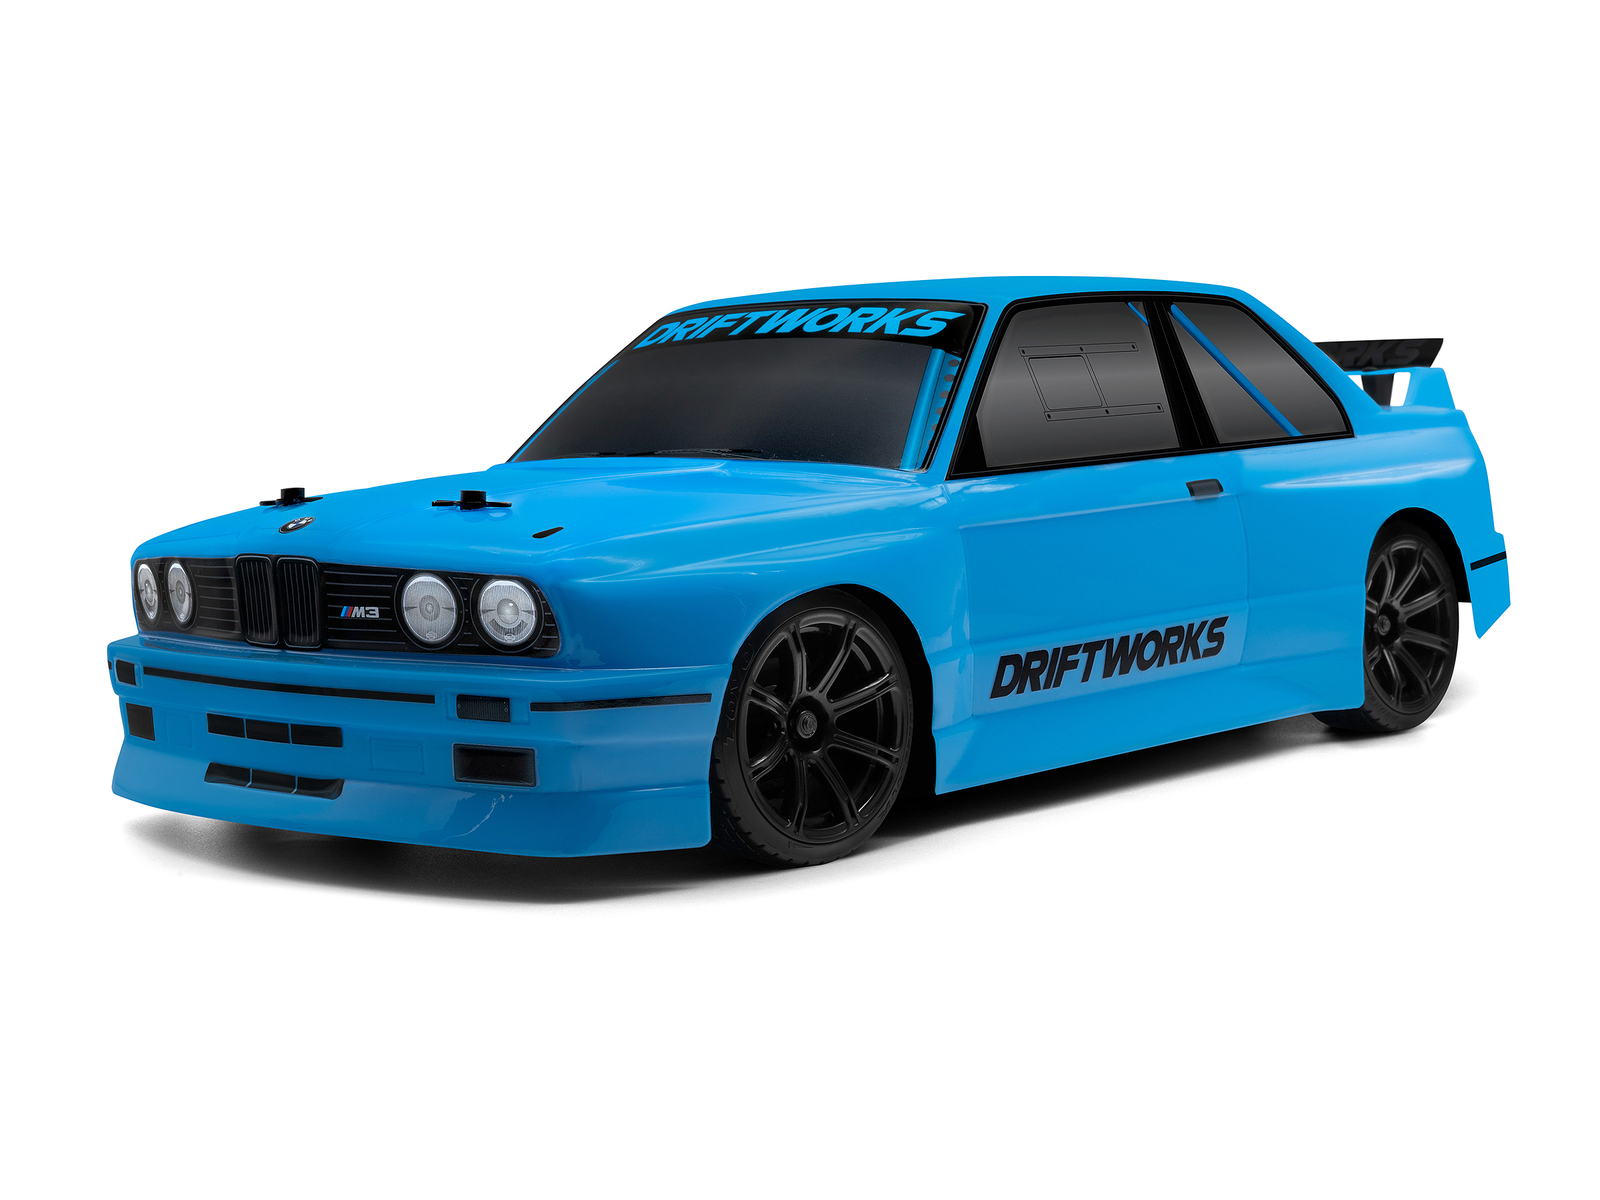 HPI 1/10 SPORT 3 DRIFT BMW E30 DRIFTWORKS, Afterpay available